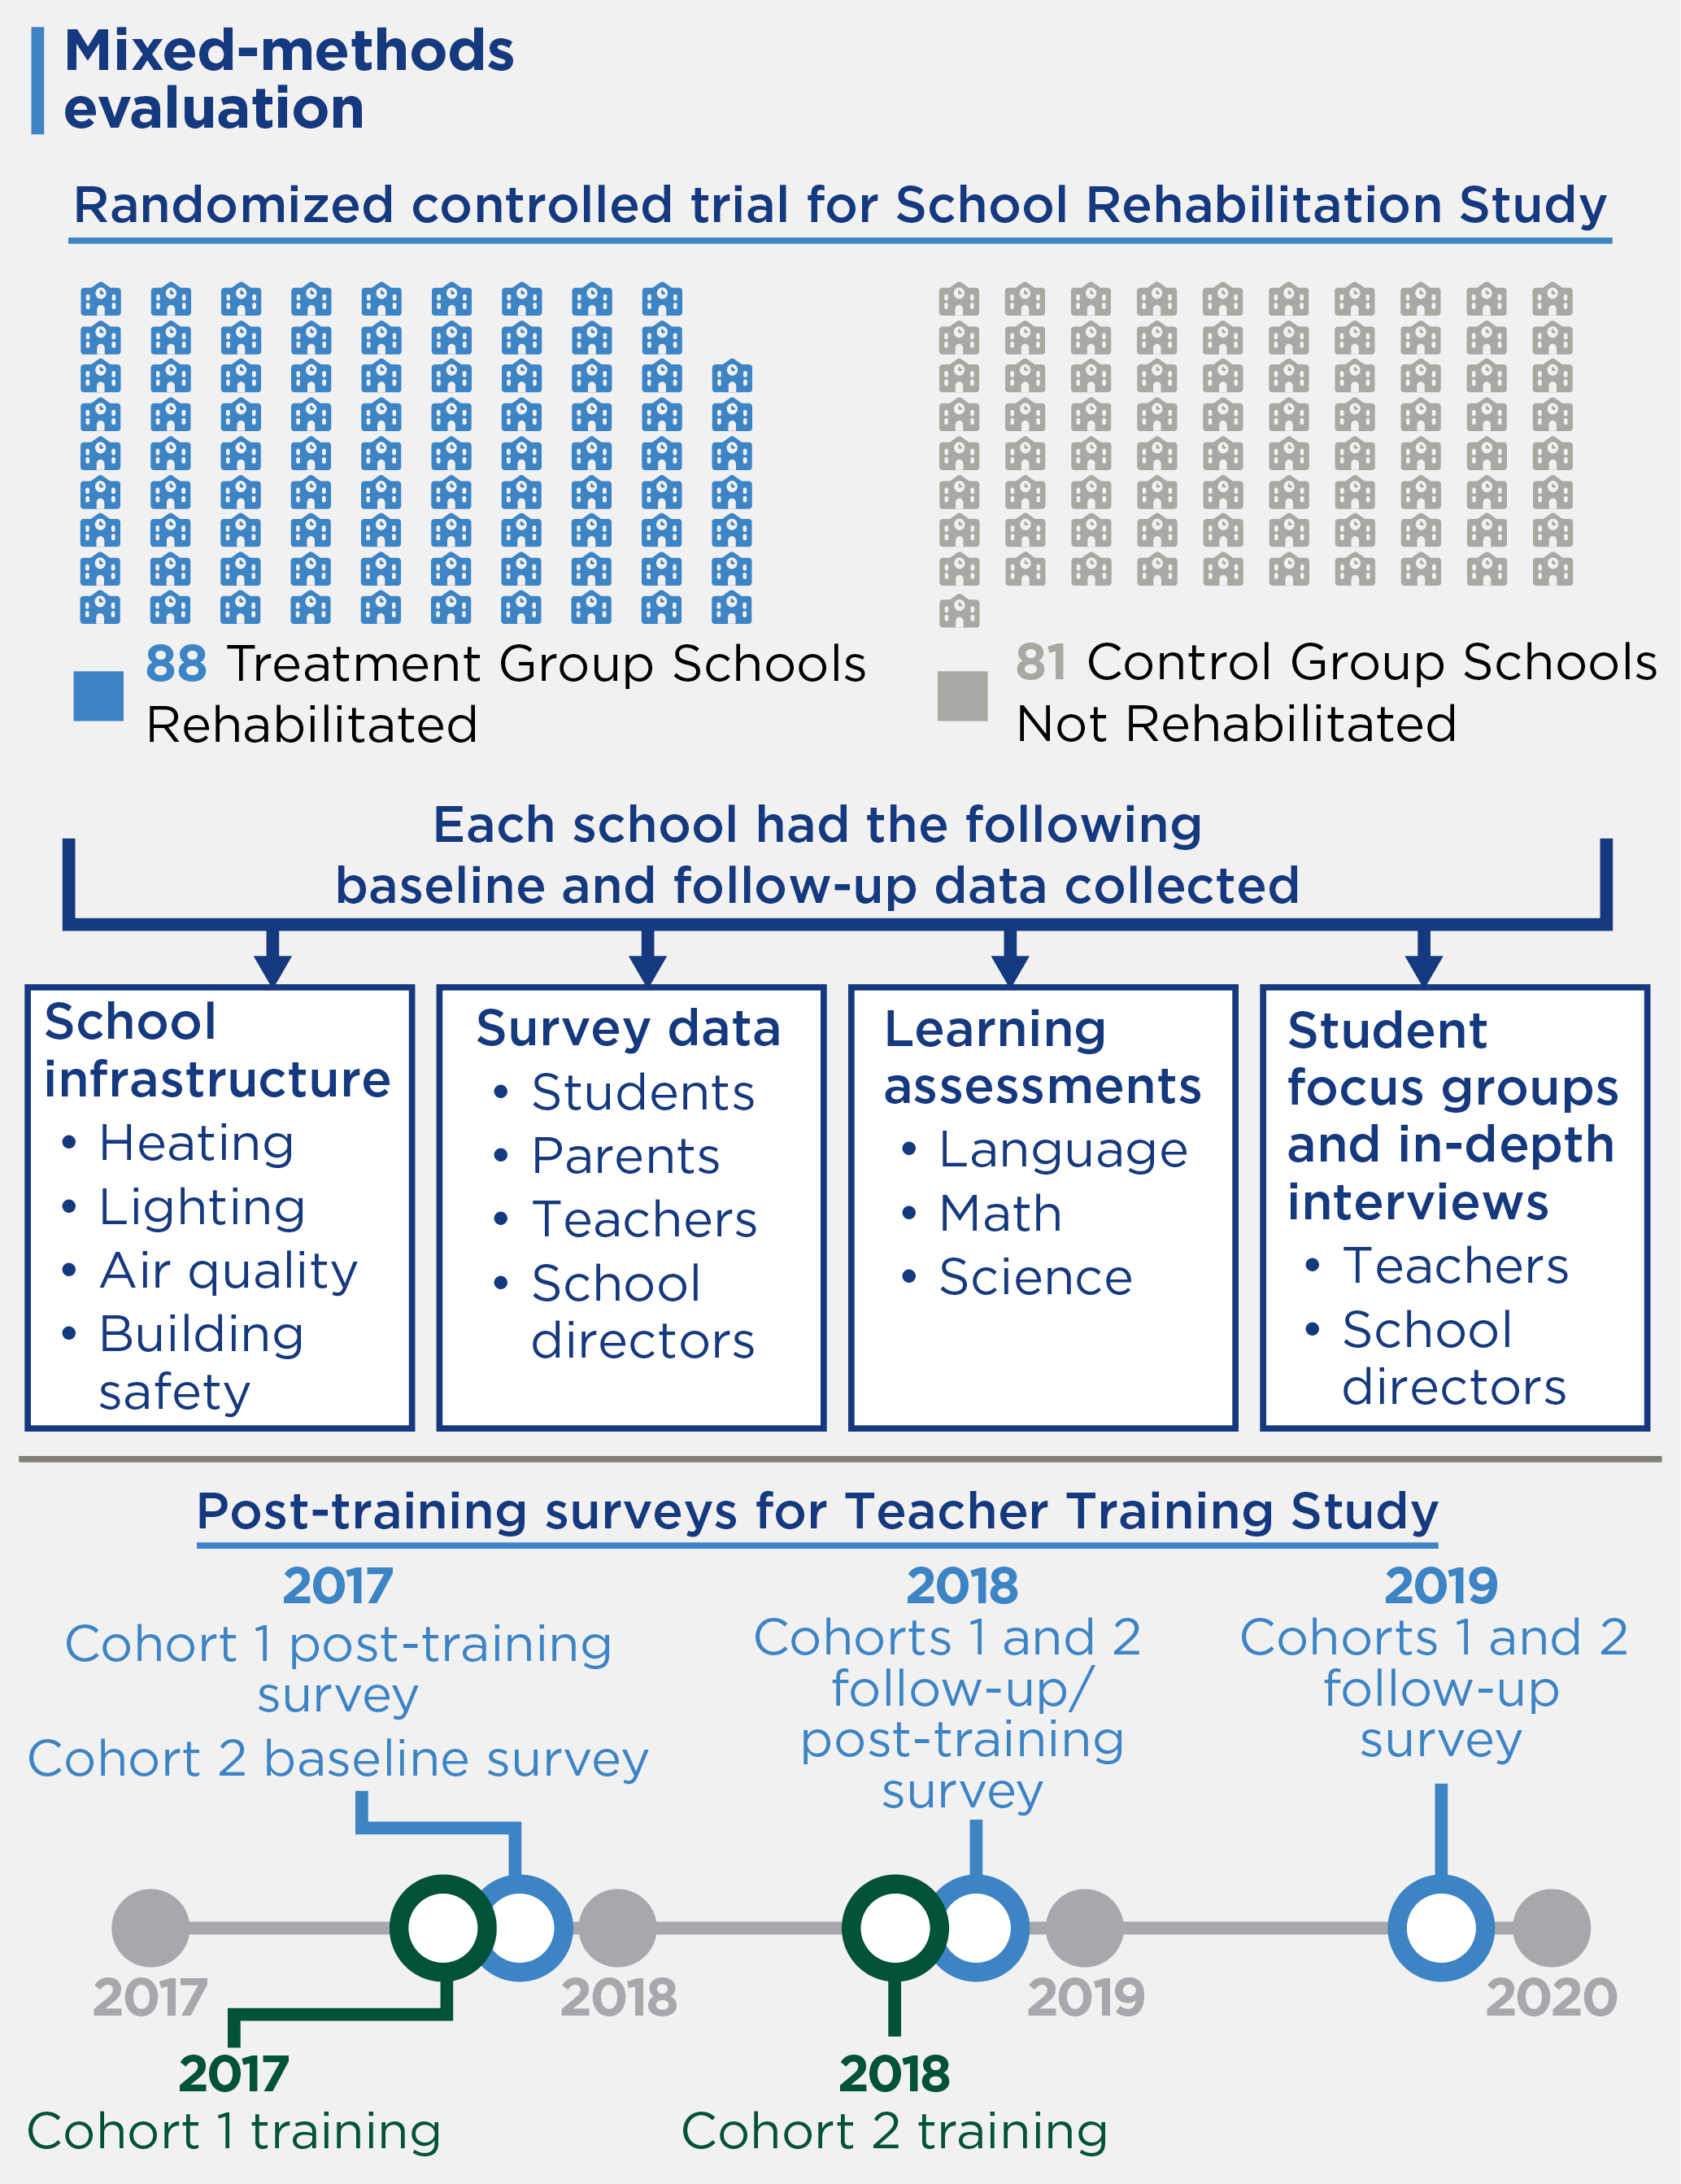 For the School Rehabilitartion Study, it estimated the impacts of rehabilitation over a follow-up period of up to five years, using a randomized controlled trial design that compared outcomes in 88 of the 91 rehabilitated schools to outcomes in a control group of non-rehabilitated schools. Baseline and follow-up data collection assessed school infrastructure conditions (including direct measurements of heating, lighting, air quality, and building safety) and collected survey data from students, parents, teachers, and school directors. For the Teacher Training Study, the analysis relied on post-training surveys conducted with a nationally representative panel of approximately 1,200 teachers surveyed in 2017, 2018, and 2019.